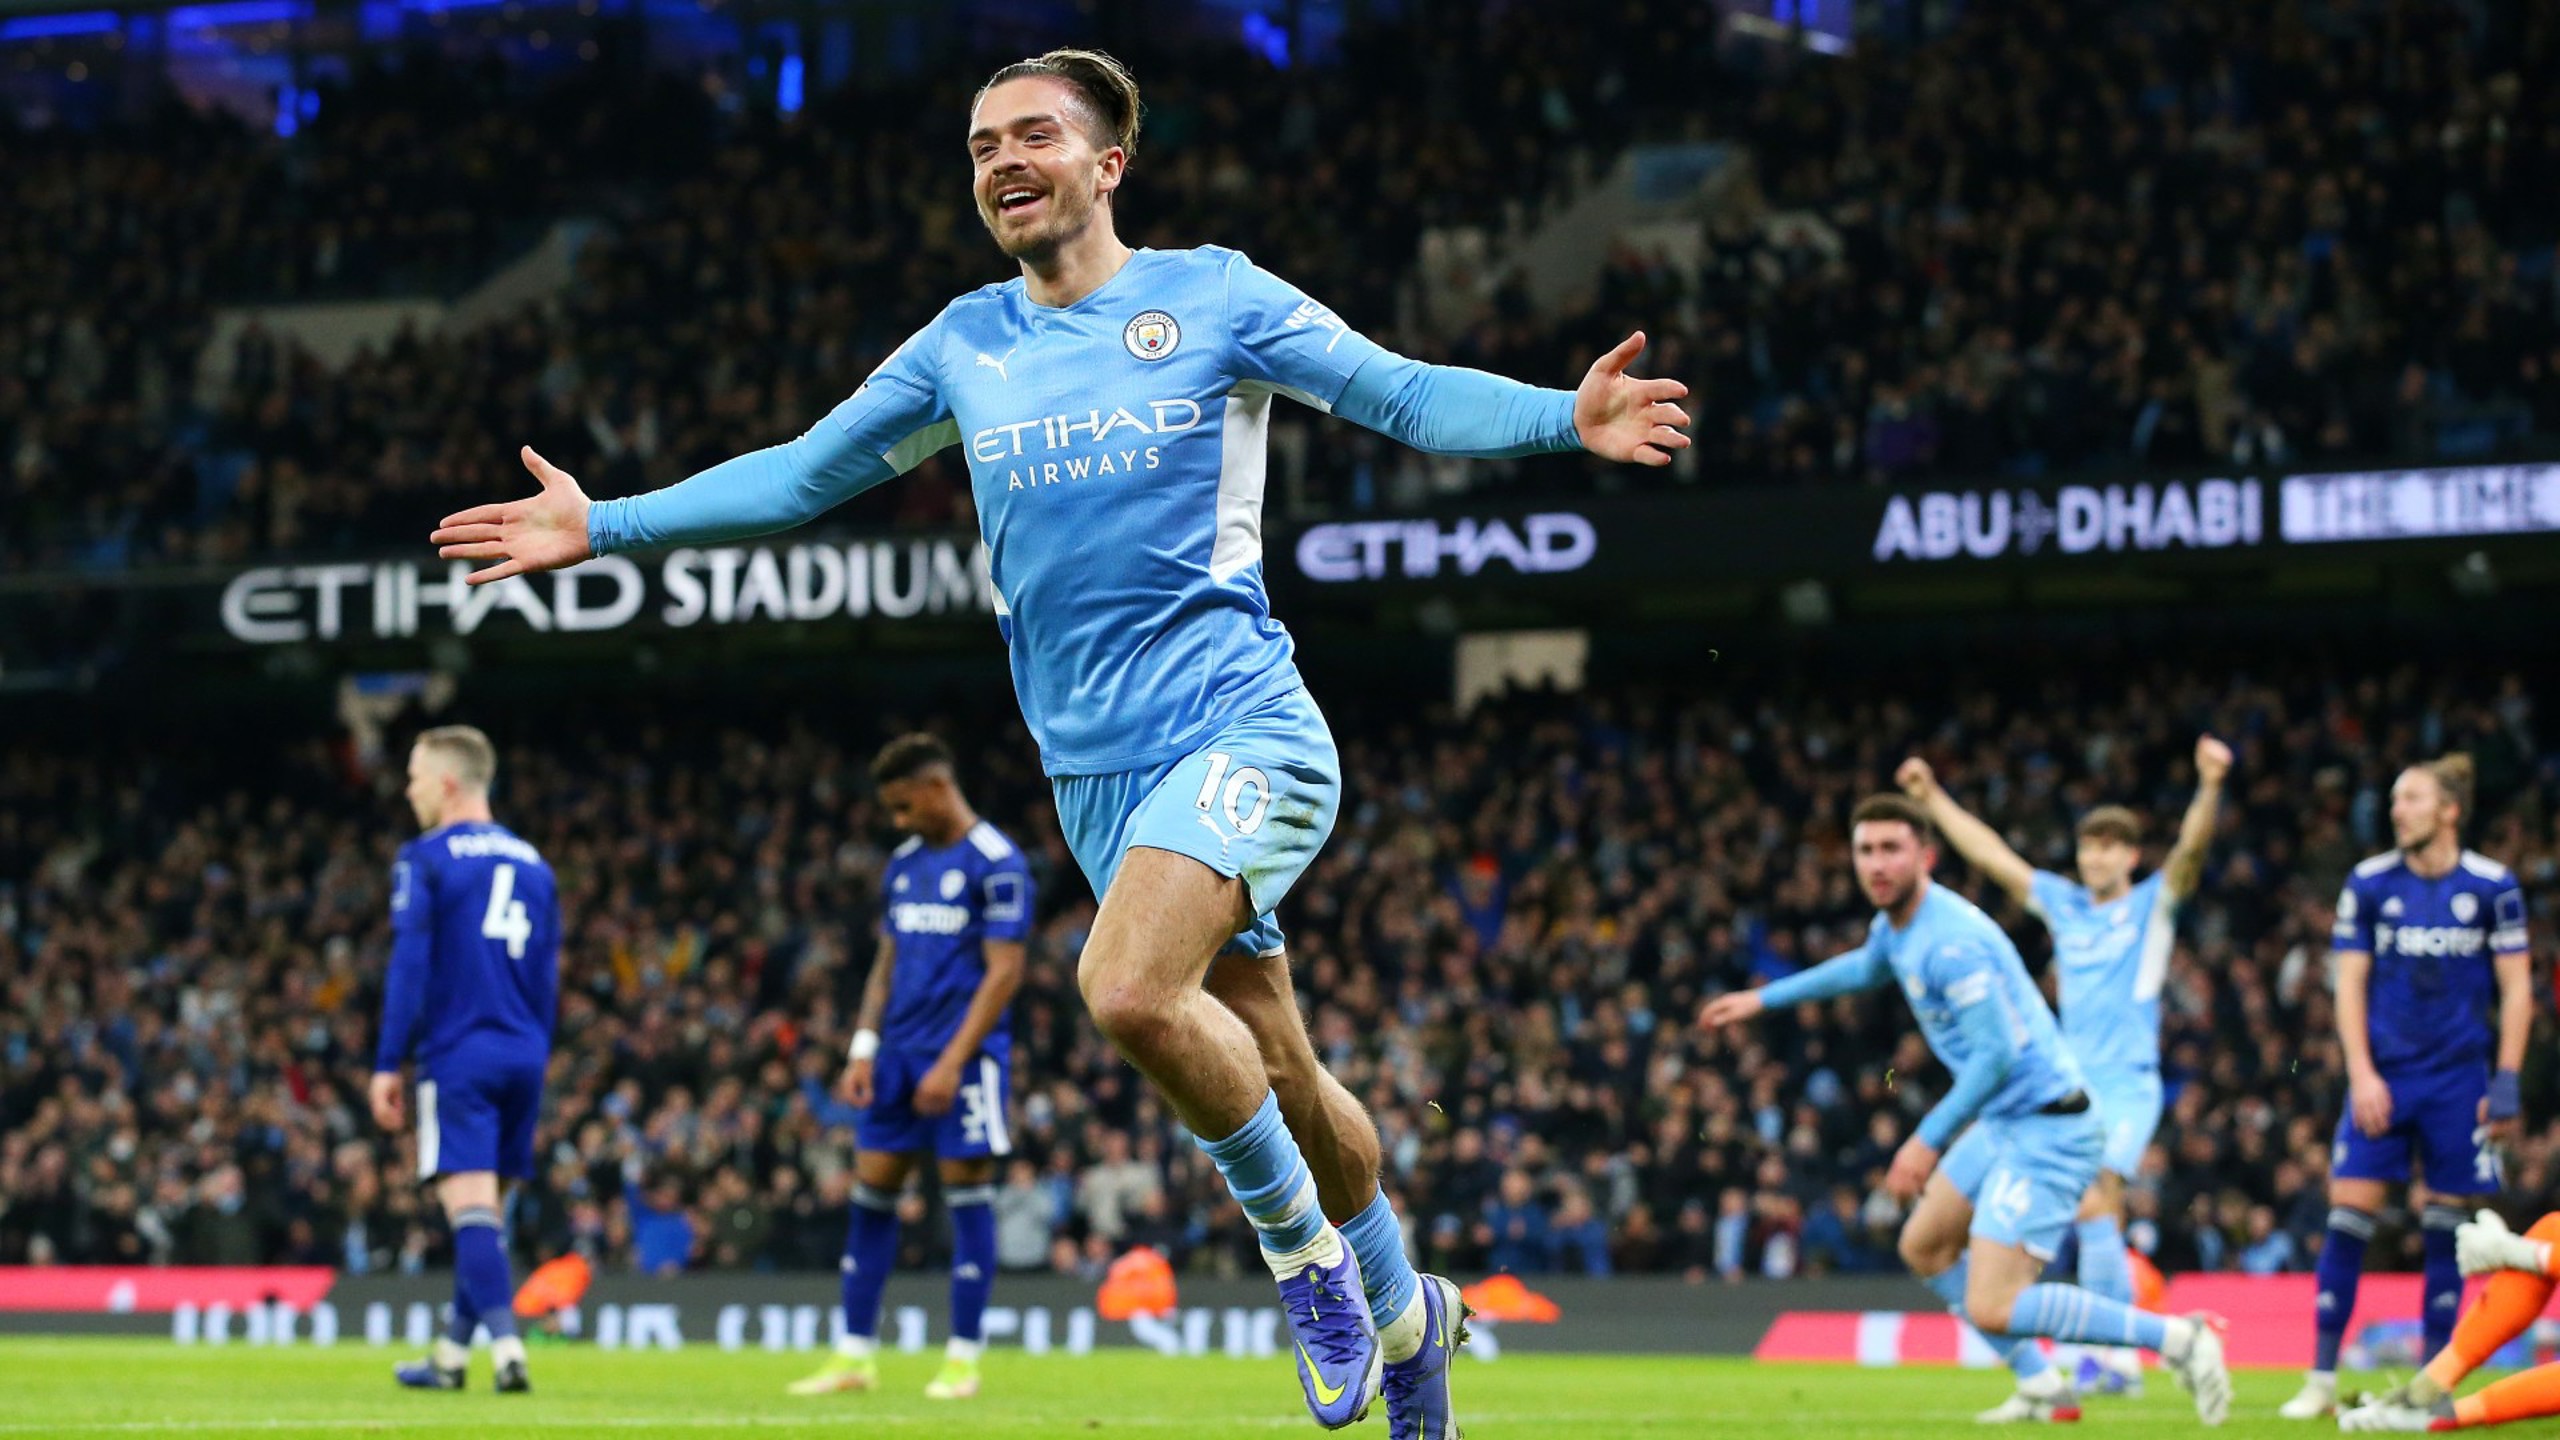 Match Gallery: City go goal crazy at the Etihad 